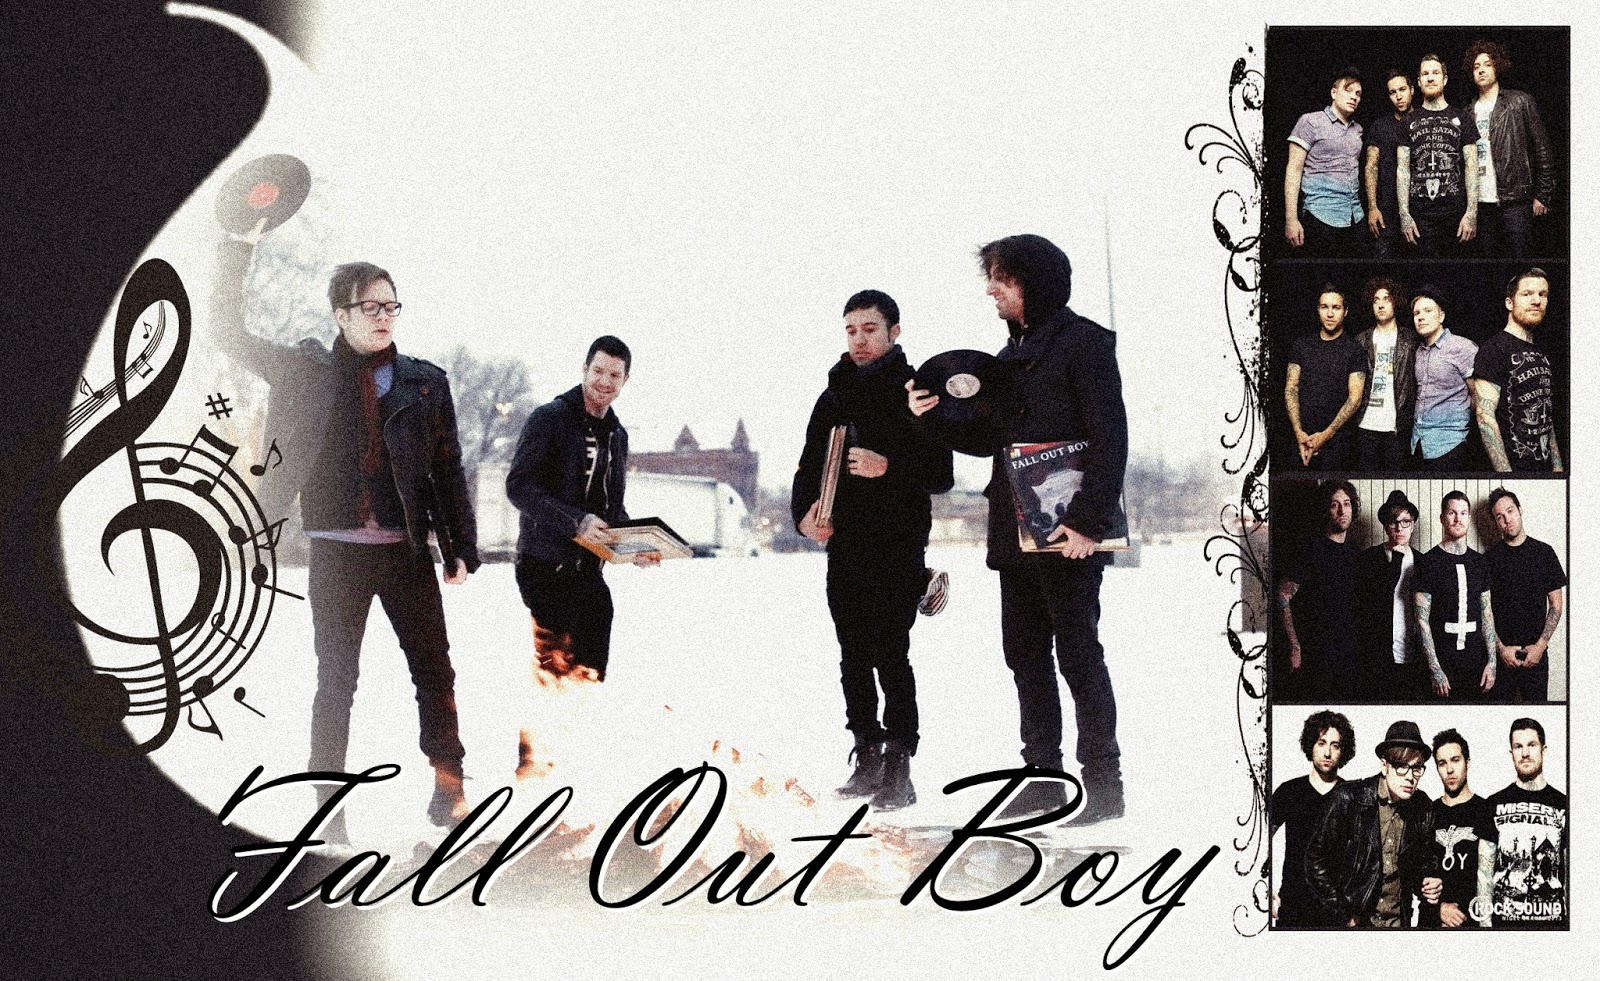 Fall Out Boy Wallpaper Fob Obsession